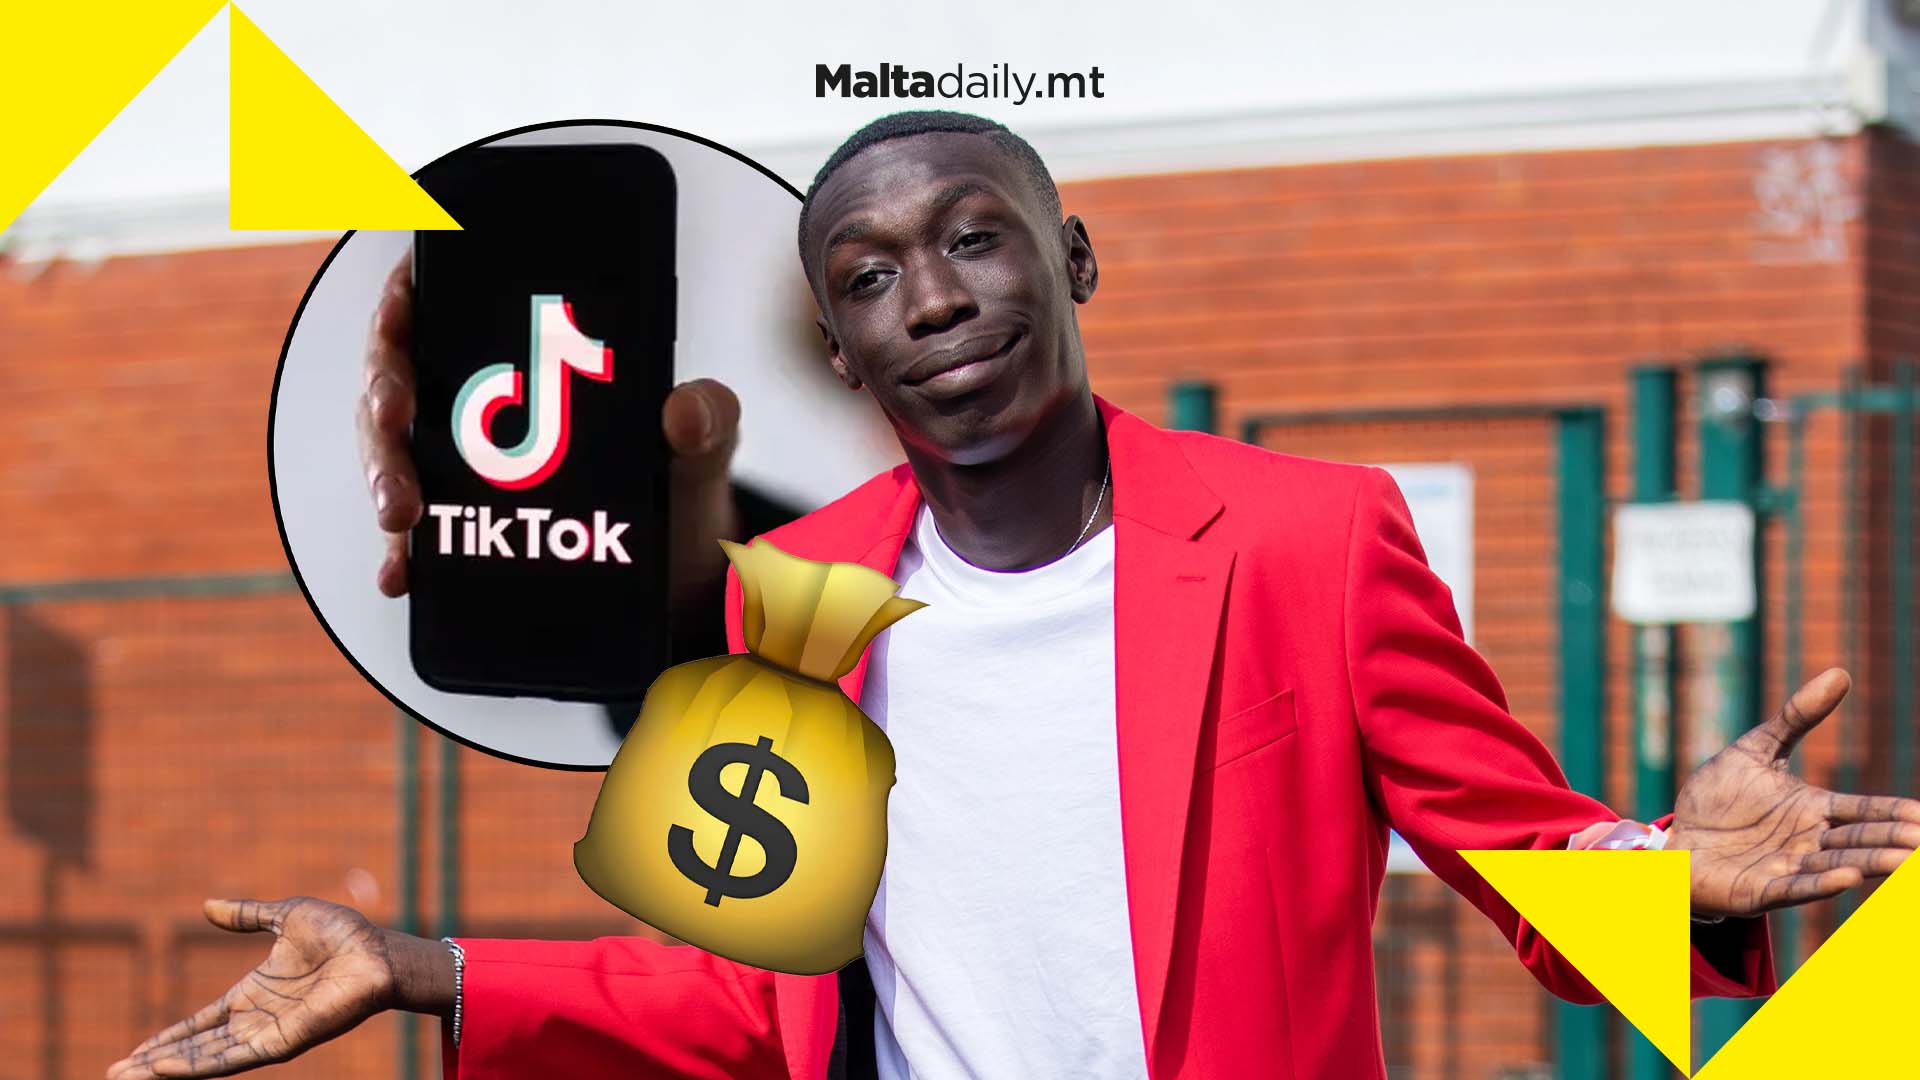 TikTok star Khaby Lame reportedly makes €750,000 from every post